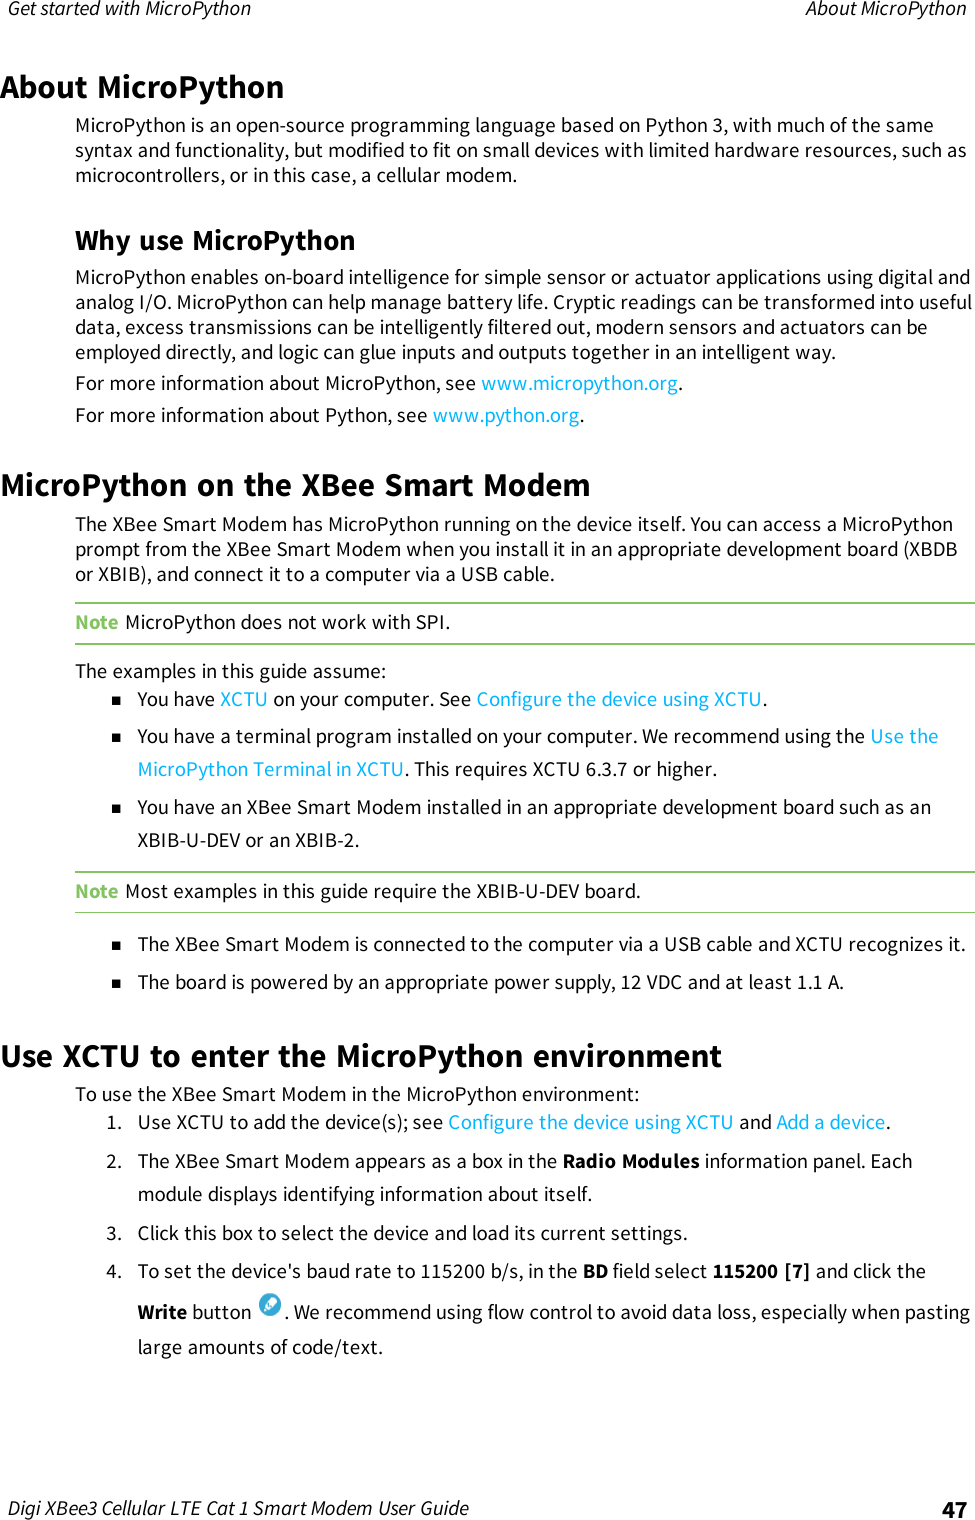 Get started with MicroPython About MicroPythonDigi XBee3 Cellular LTE Cat 1 Smart Modem User Guide 47About MicroPythonMicroPython is an open-source programming language based on Python 3, with much of the samesyntax and functionality, but modified to fit on small devices with limited hardware resources, such asmicrocontrollers, or in this case, a cellular modem.Why use MicroPythonMicroPython enables on-board intelligence for simple sensor or actuator applications using digital andanalog I/O. MicroPython can help manage battery life. Cryptic readings can be transformed into usefuldata, excess transmissions can be intelligently filtered out, modern sensors and actuators can beemployed directly, and logic can glue inputs and outputs together in an intelligent way.For more information about MicroPython, see www.micropython.org.For more information about Python, see www.python.org.MicroPython on the XBee Smart ModemThe XBee Smart Modem has MicroPython running on the device itself. You can access a MicroPythonprompt from the XBee Smart Modem when you install it in an appropriate development board (XBDBor XBIB), and connect it to a computer via a USB cable.Note MicroPython does not work with SPI.The examples in this guide assume:nYou have XCTU on your computer. See Configure the device using XCTU.nYou have a terminal program installed on your computer. We recommend using the Use theMicroPython Terminal in XCTU. This requires XCTU 6.3.7 or higher.nYou have an XBee Smart Modem installed in an appropriate development board such as anXBIB-U-DEV or an XBIB-2.Note Most examples in this guide require the XBIB-U-DEV board.nThe XBee Smart Modem is connected to the computer via a USB cable and XCTU recognizes it.nThe board is powered by an appropriate power supply, 12 VDC and at least 1.1 A.Use XCTU to enter the MicroPython environmentTo use the XBee Smart Modem in the MicroPython environment:1. Use XCTU to add the device(s); see Configure the device using XCTU and Add a device.2. The XBee Smart Modem appears as a box in the Radio Modules information panel. Eachmodule displays identifying information about itself.3. Click this box to select the device and load its current settings.4. To set the device&apos;s baud rate to 115200 b/s, in the BD field select 115200 [7] and click theWrite button . We recommend using flow control to avoid data loss, especially when pastinglarge amounts of code/text.